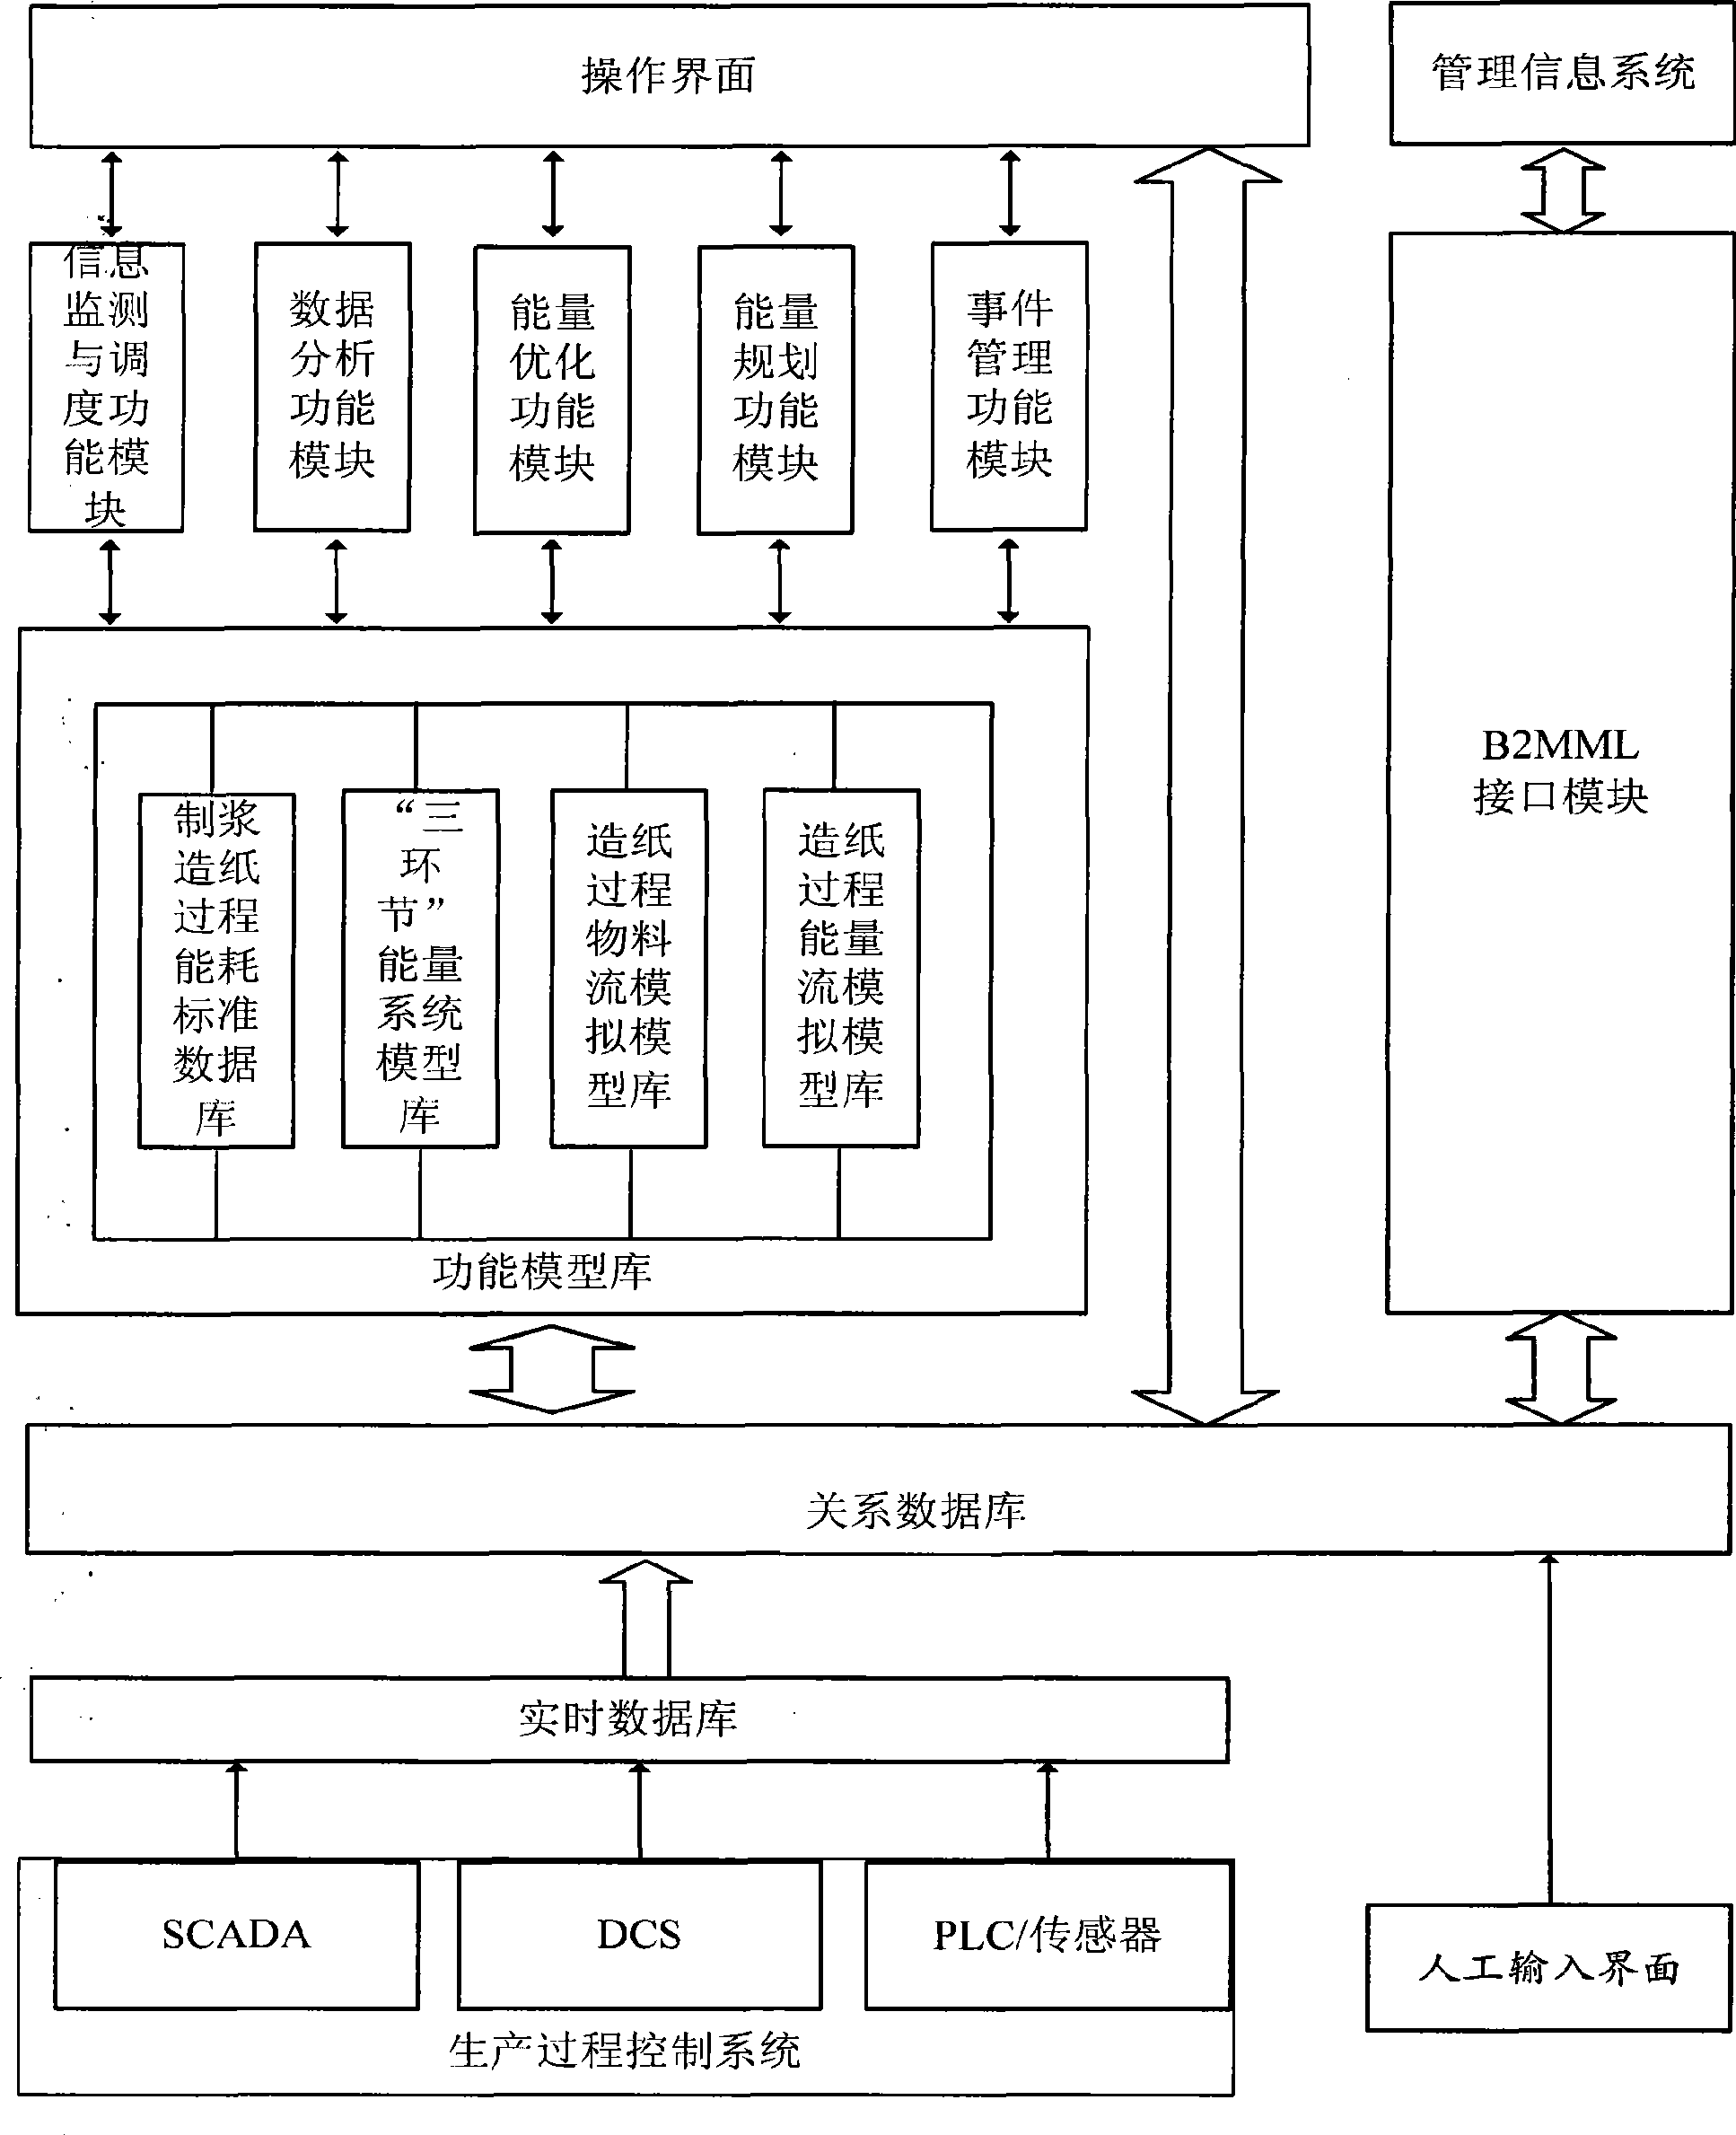 Synthesis optimizing and scheduling method of energy system